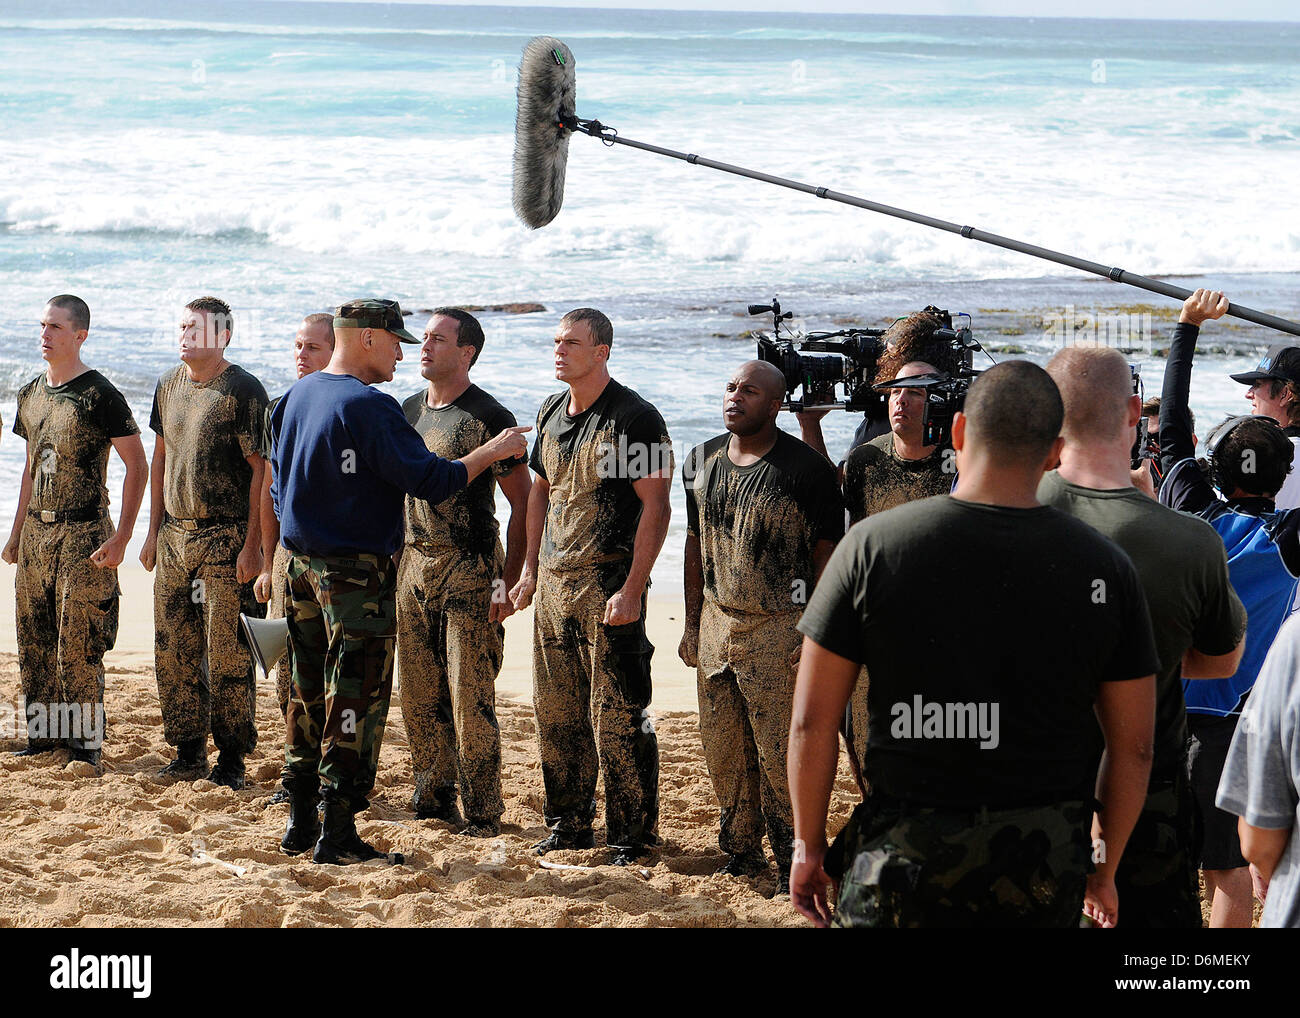 Actors Alex O'Loughlin, Alan Ritchson and Terry O'Quinn along with sailors from Joint Base Pearl Harbor-Hickam simulate Navy SEALS training during filming of the television series CBS's Hawaii Five-0 March 1, 2013 in Haleiwa, Hawaii. Stock Photo